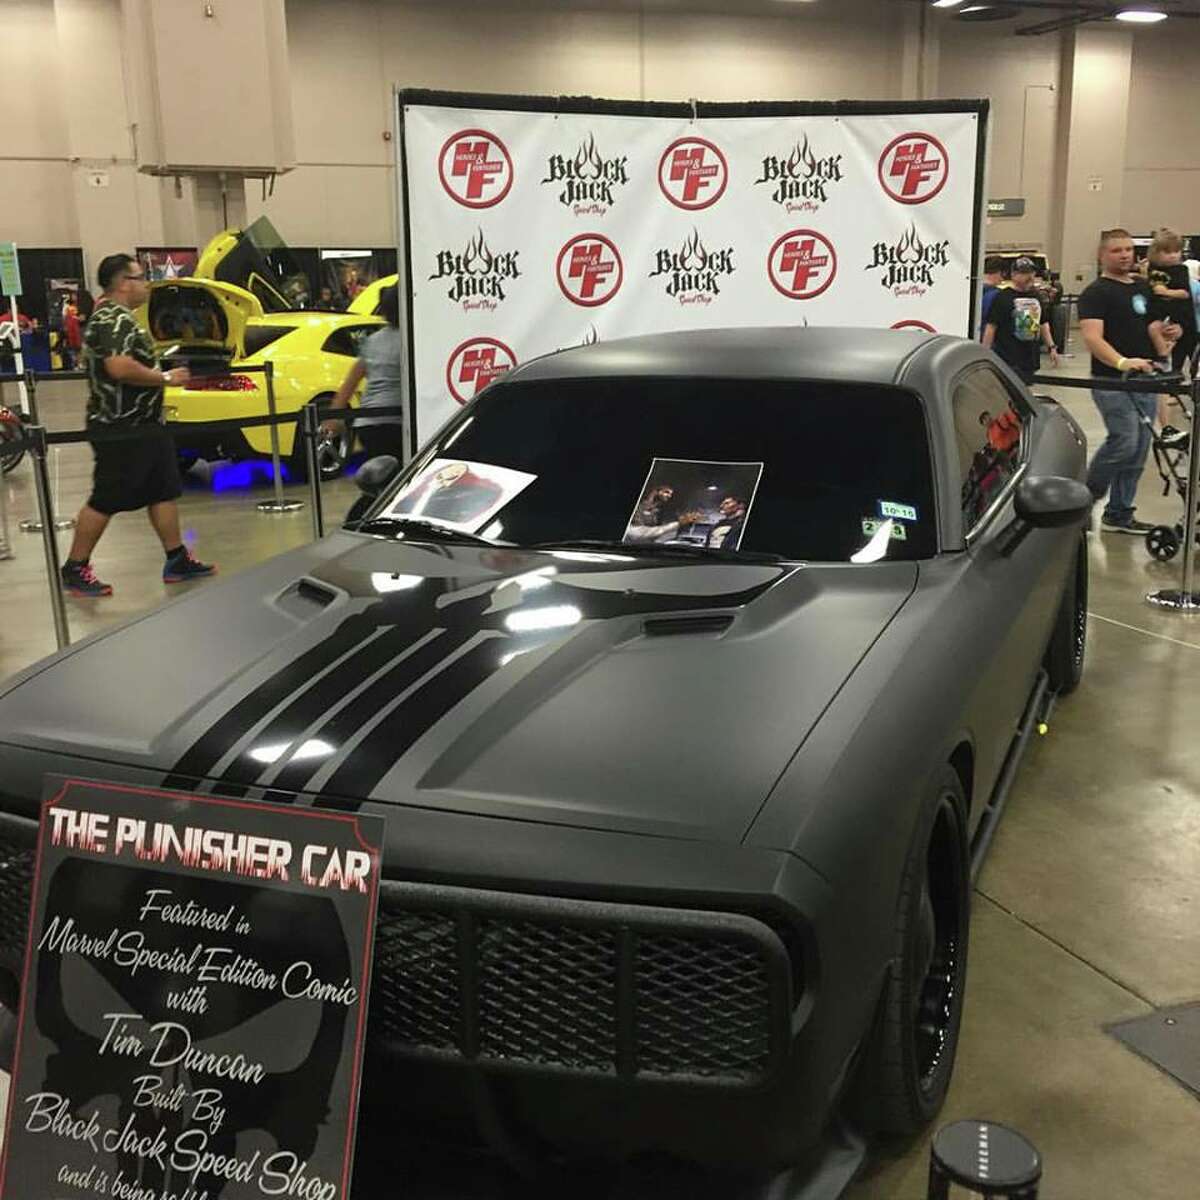 A vehicle that will excite Spurs, Marvel and customs car fan bases is up for grabs in San Antonio.